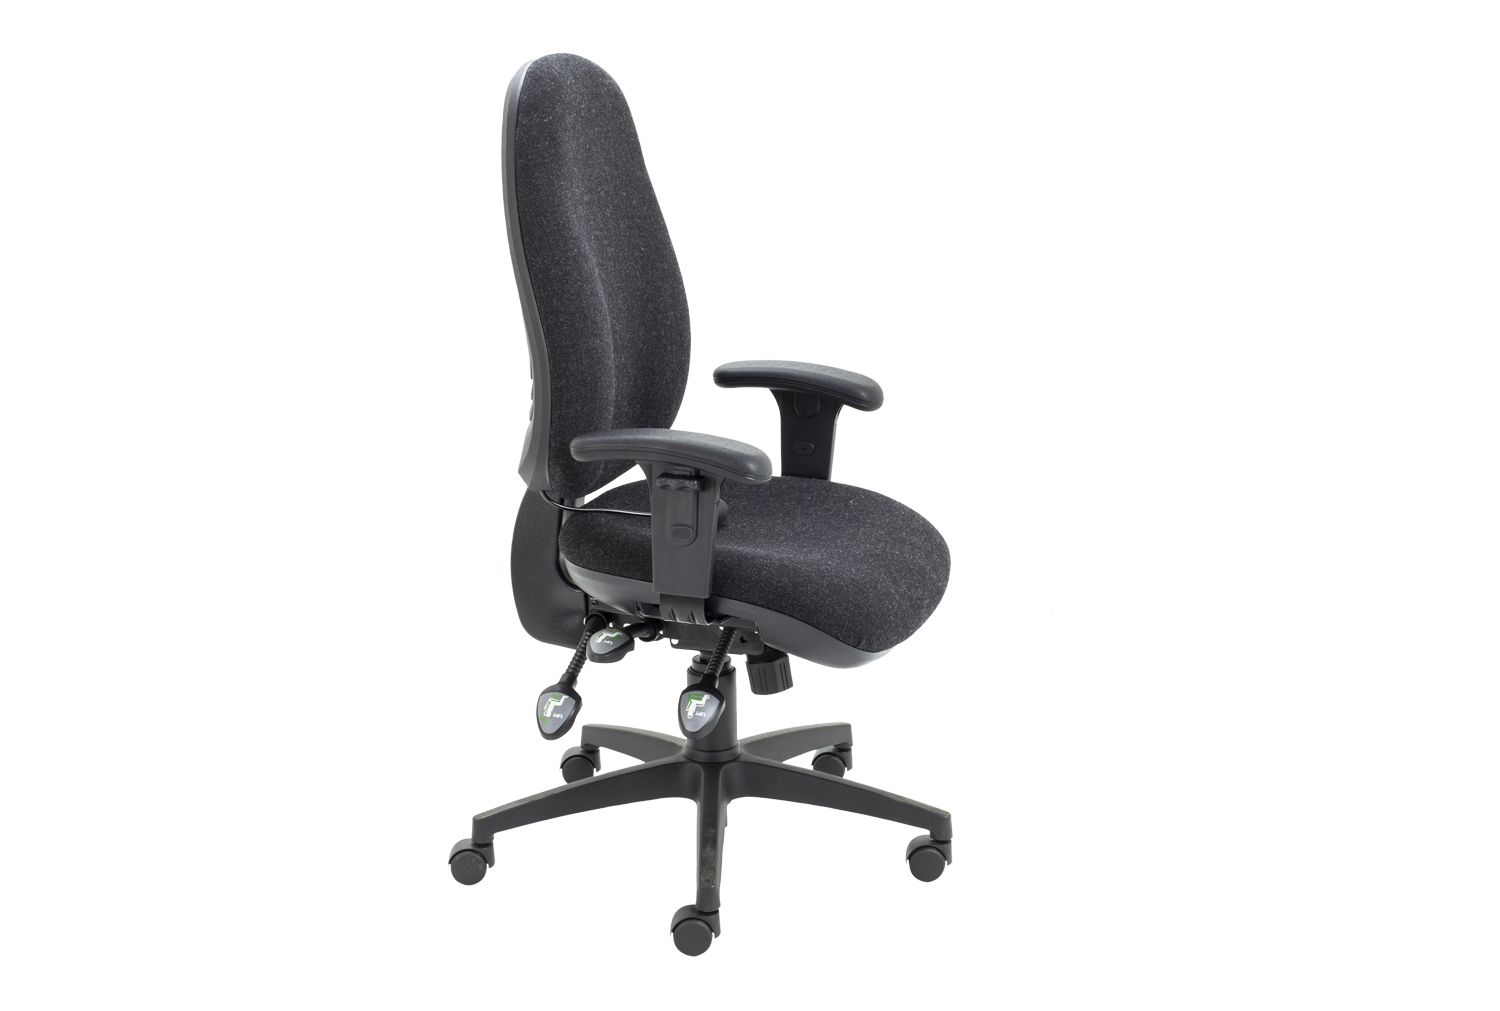 Orchid Deluxe Lumbar Pump Ergonomic Operator Office Chair With Height Adjustable Arms, Charcoal, Fully Installed